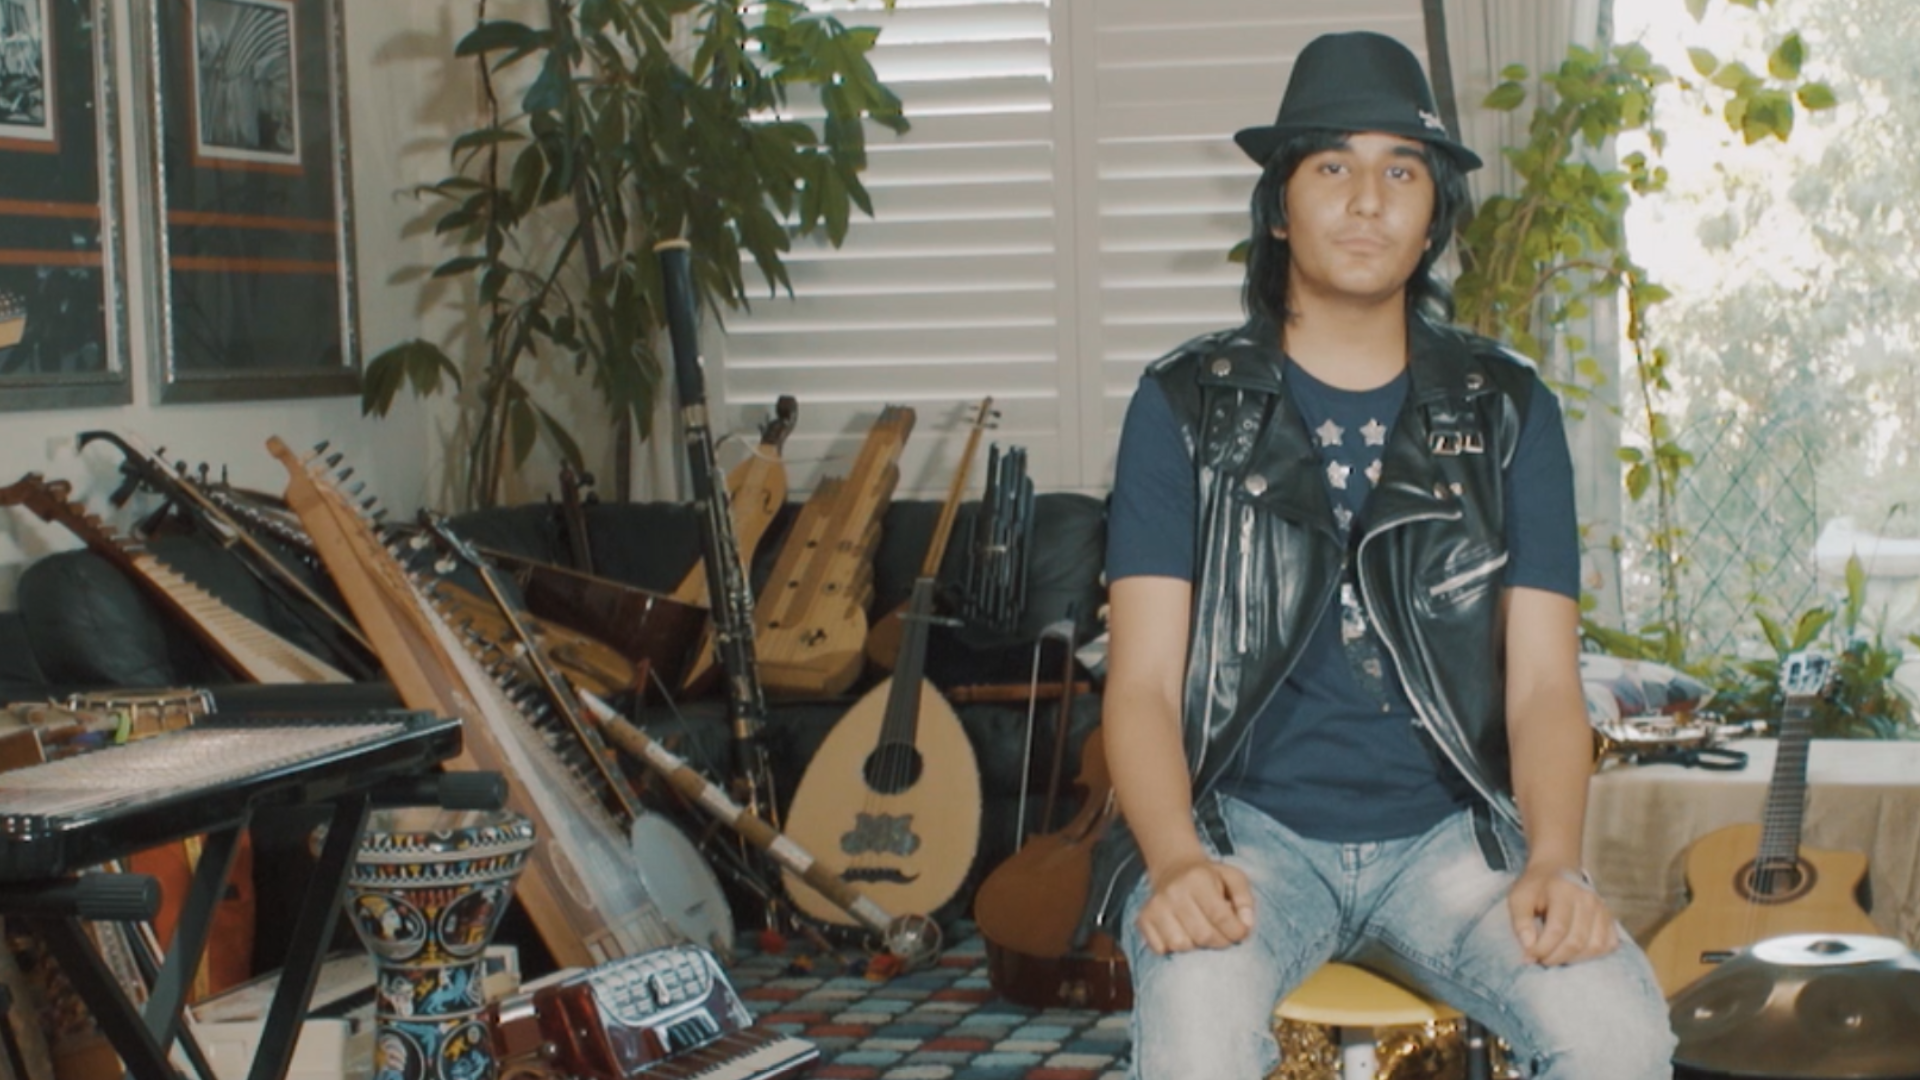 Neil Nayyar is a 13 year old from Elk Grove, but the more important number about Nayyar is 107. That's how many instruments from around the world that this teenager has mastered. Video by Photojournalist Barbara Bingley